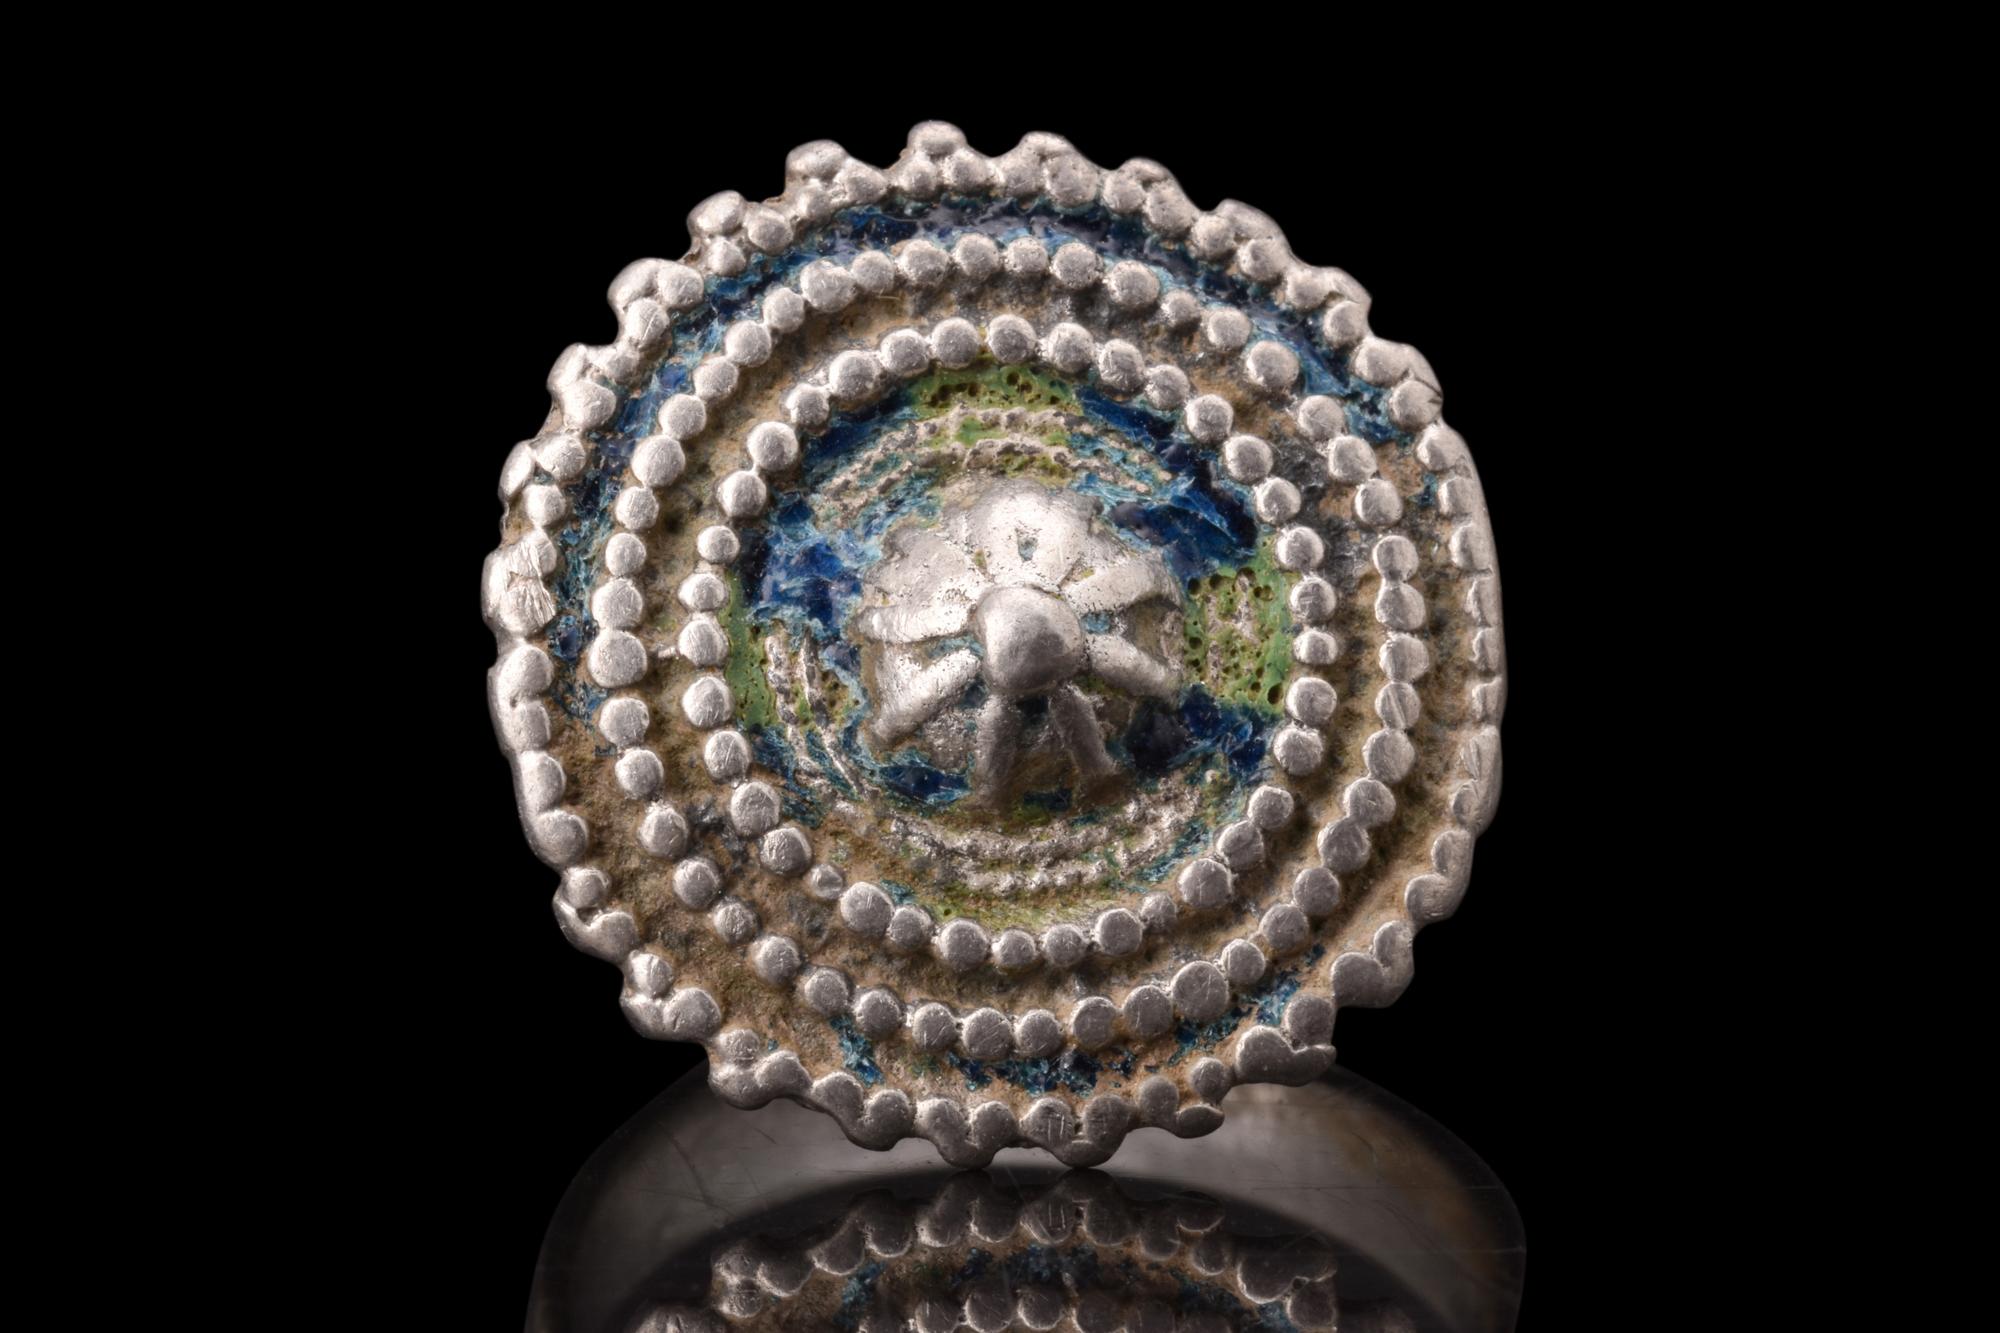 A silver Byzantine ring, distinguished by its large, granulated shield bezel, which reflects the artistic prowess and cultural significance of the Byzantine Empire. The ring possesses a round hoop with a flat-section shank. Its applied bezel